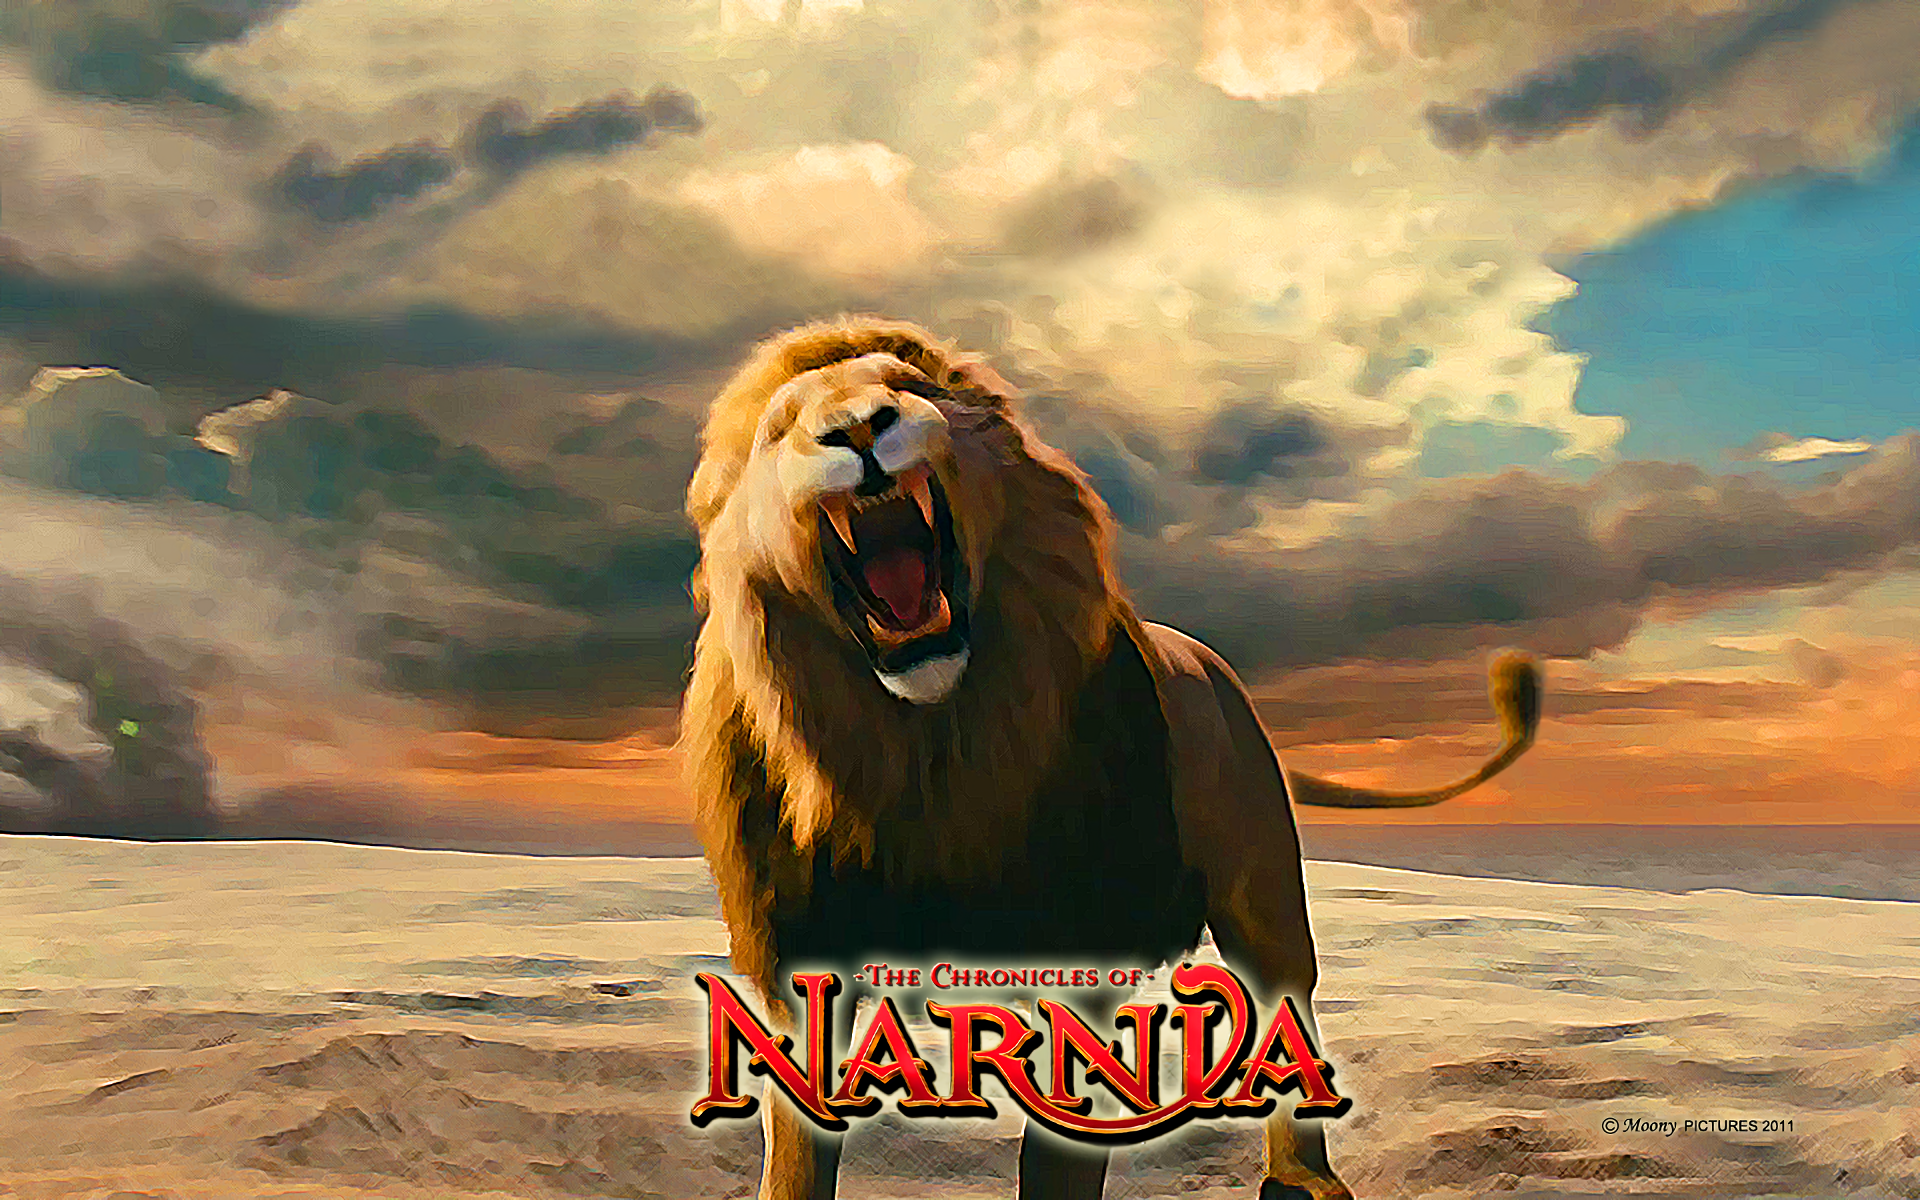 Movie The Chronicles of Narnia: The Lion, the Witch and the Wardrobe HD Wallpaper | Background Image